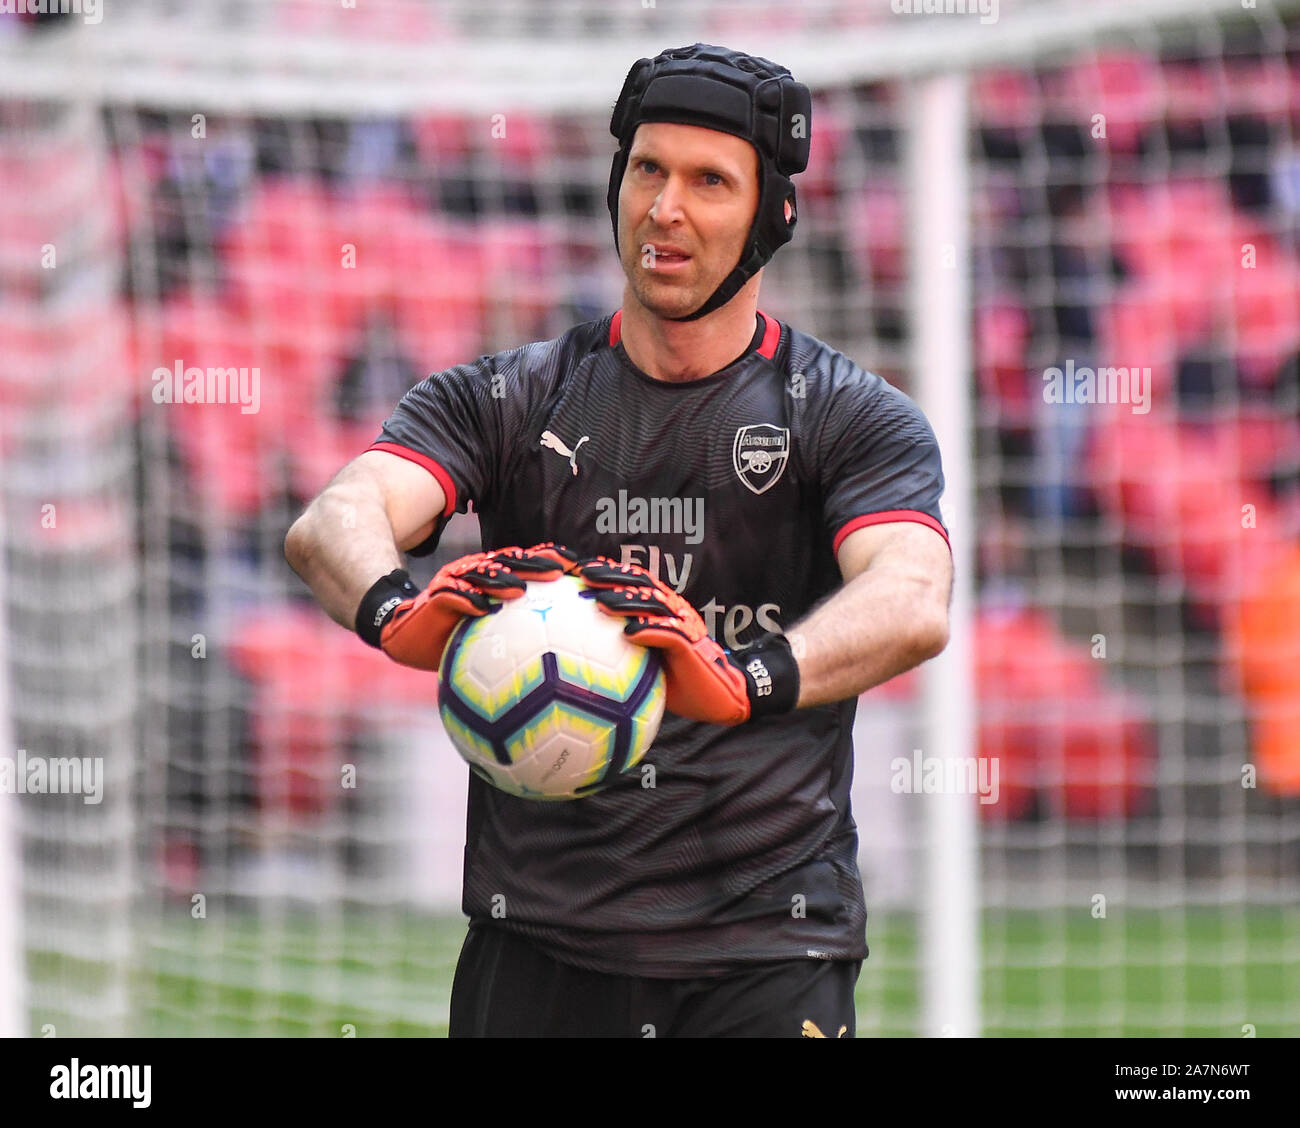 LONDON, ENGLAND - MARCH 2, 2019: Petr Cech of Arsenal pictured ahead of the 2018/19 Premier League game between Tottenham Hotspur and Arsenal FC at Wembley Stadium. Stock Photo